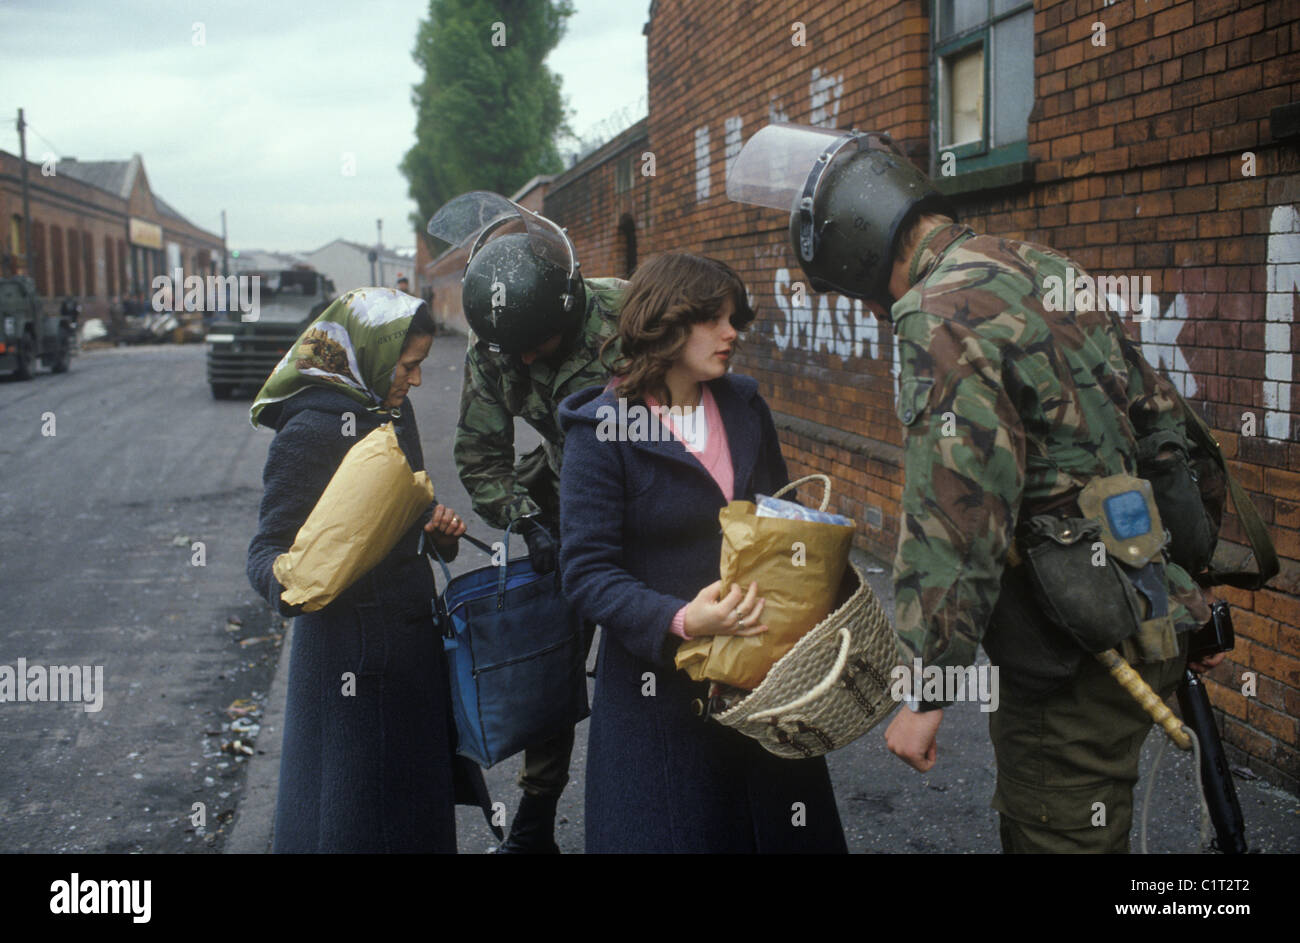 Belfast The Troubles. 1980s. British army soldiers stop and search woman mother and daughter, they are looking through their shopping bags. 1981 HOMER SYKES Stock Photo